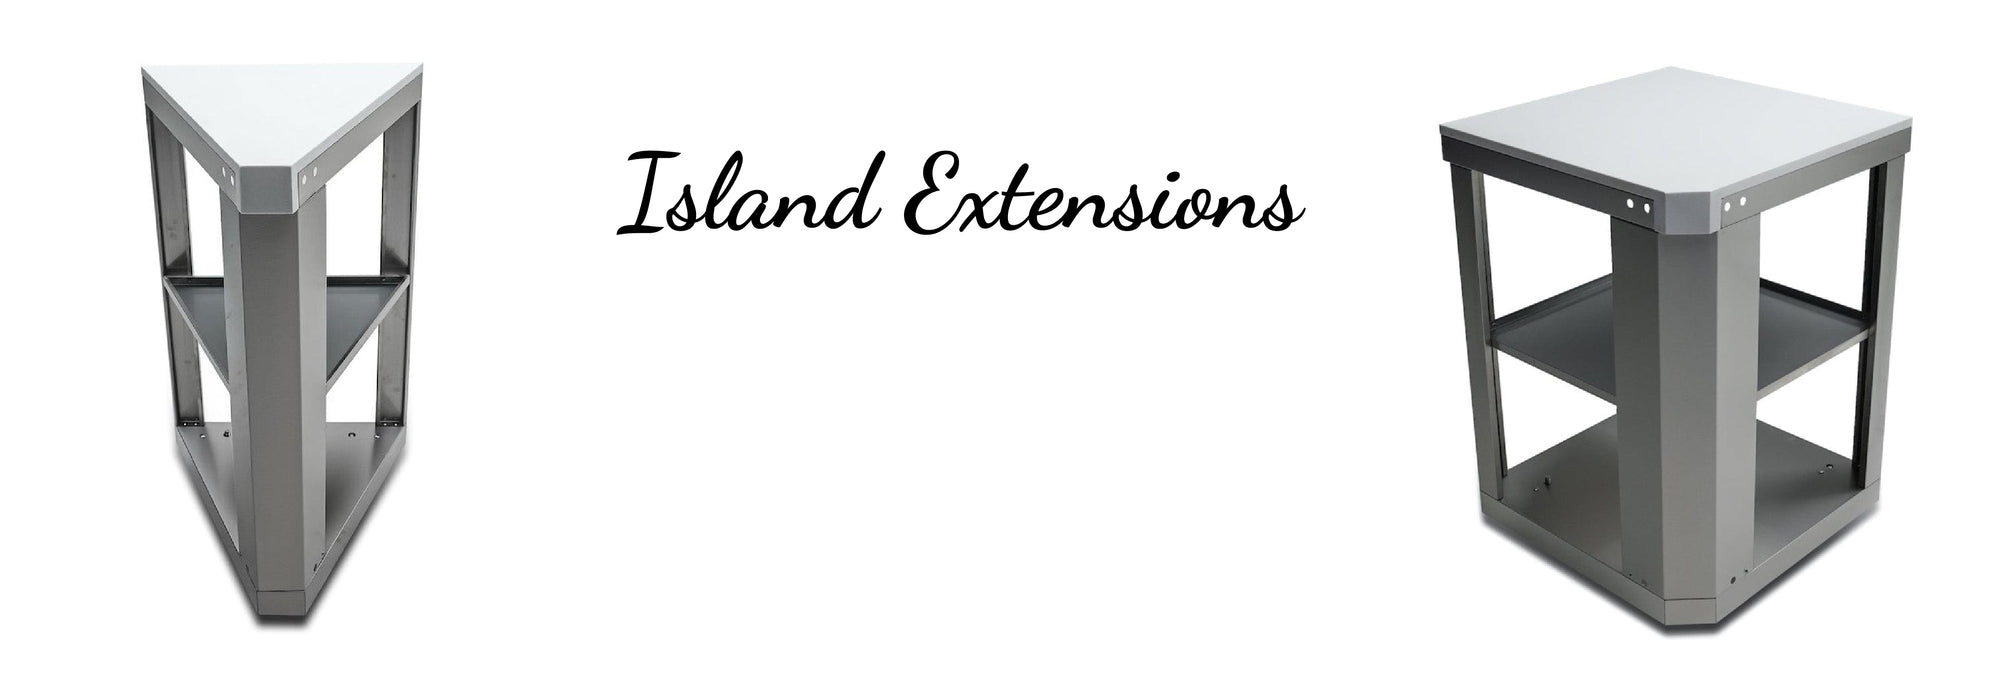 Island Extensions